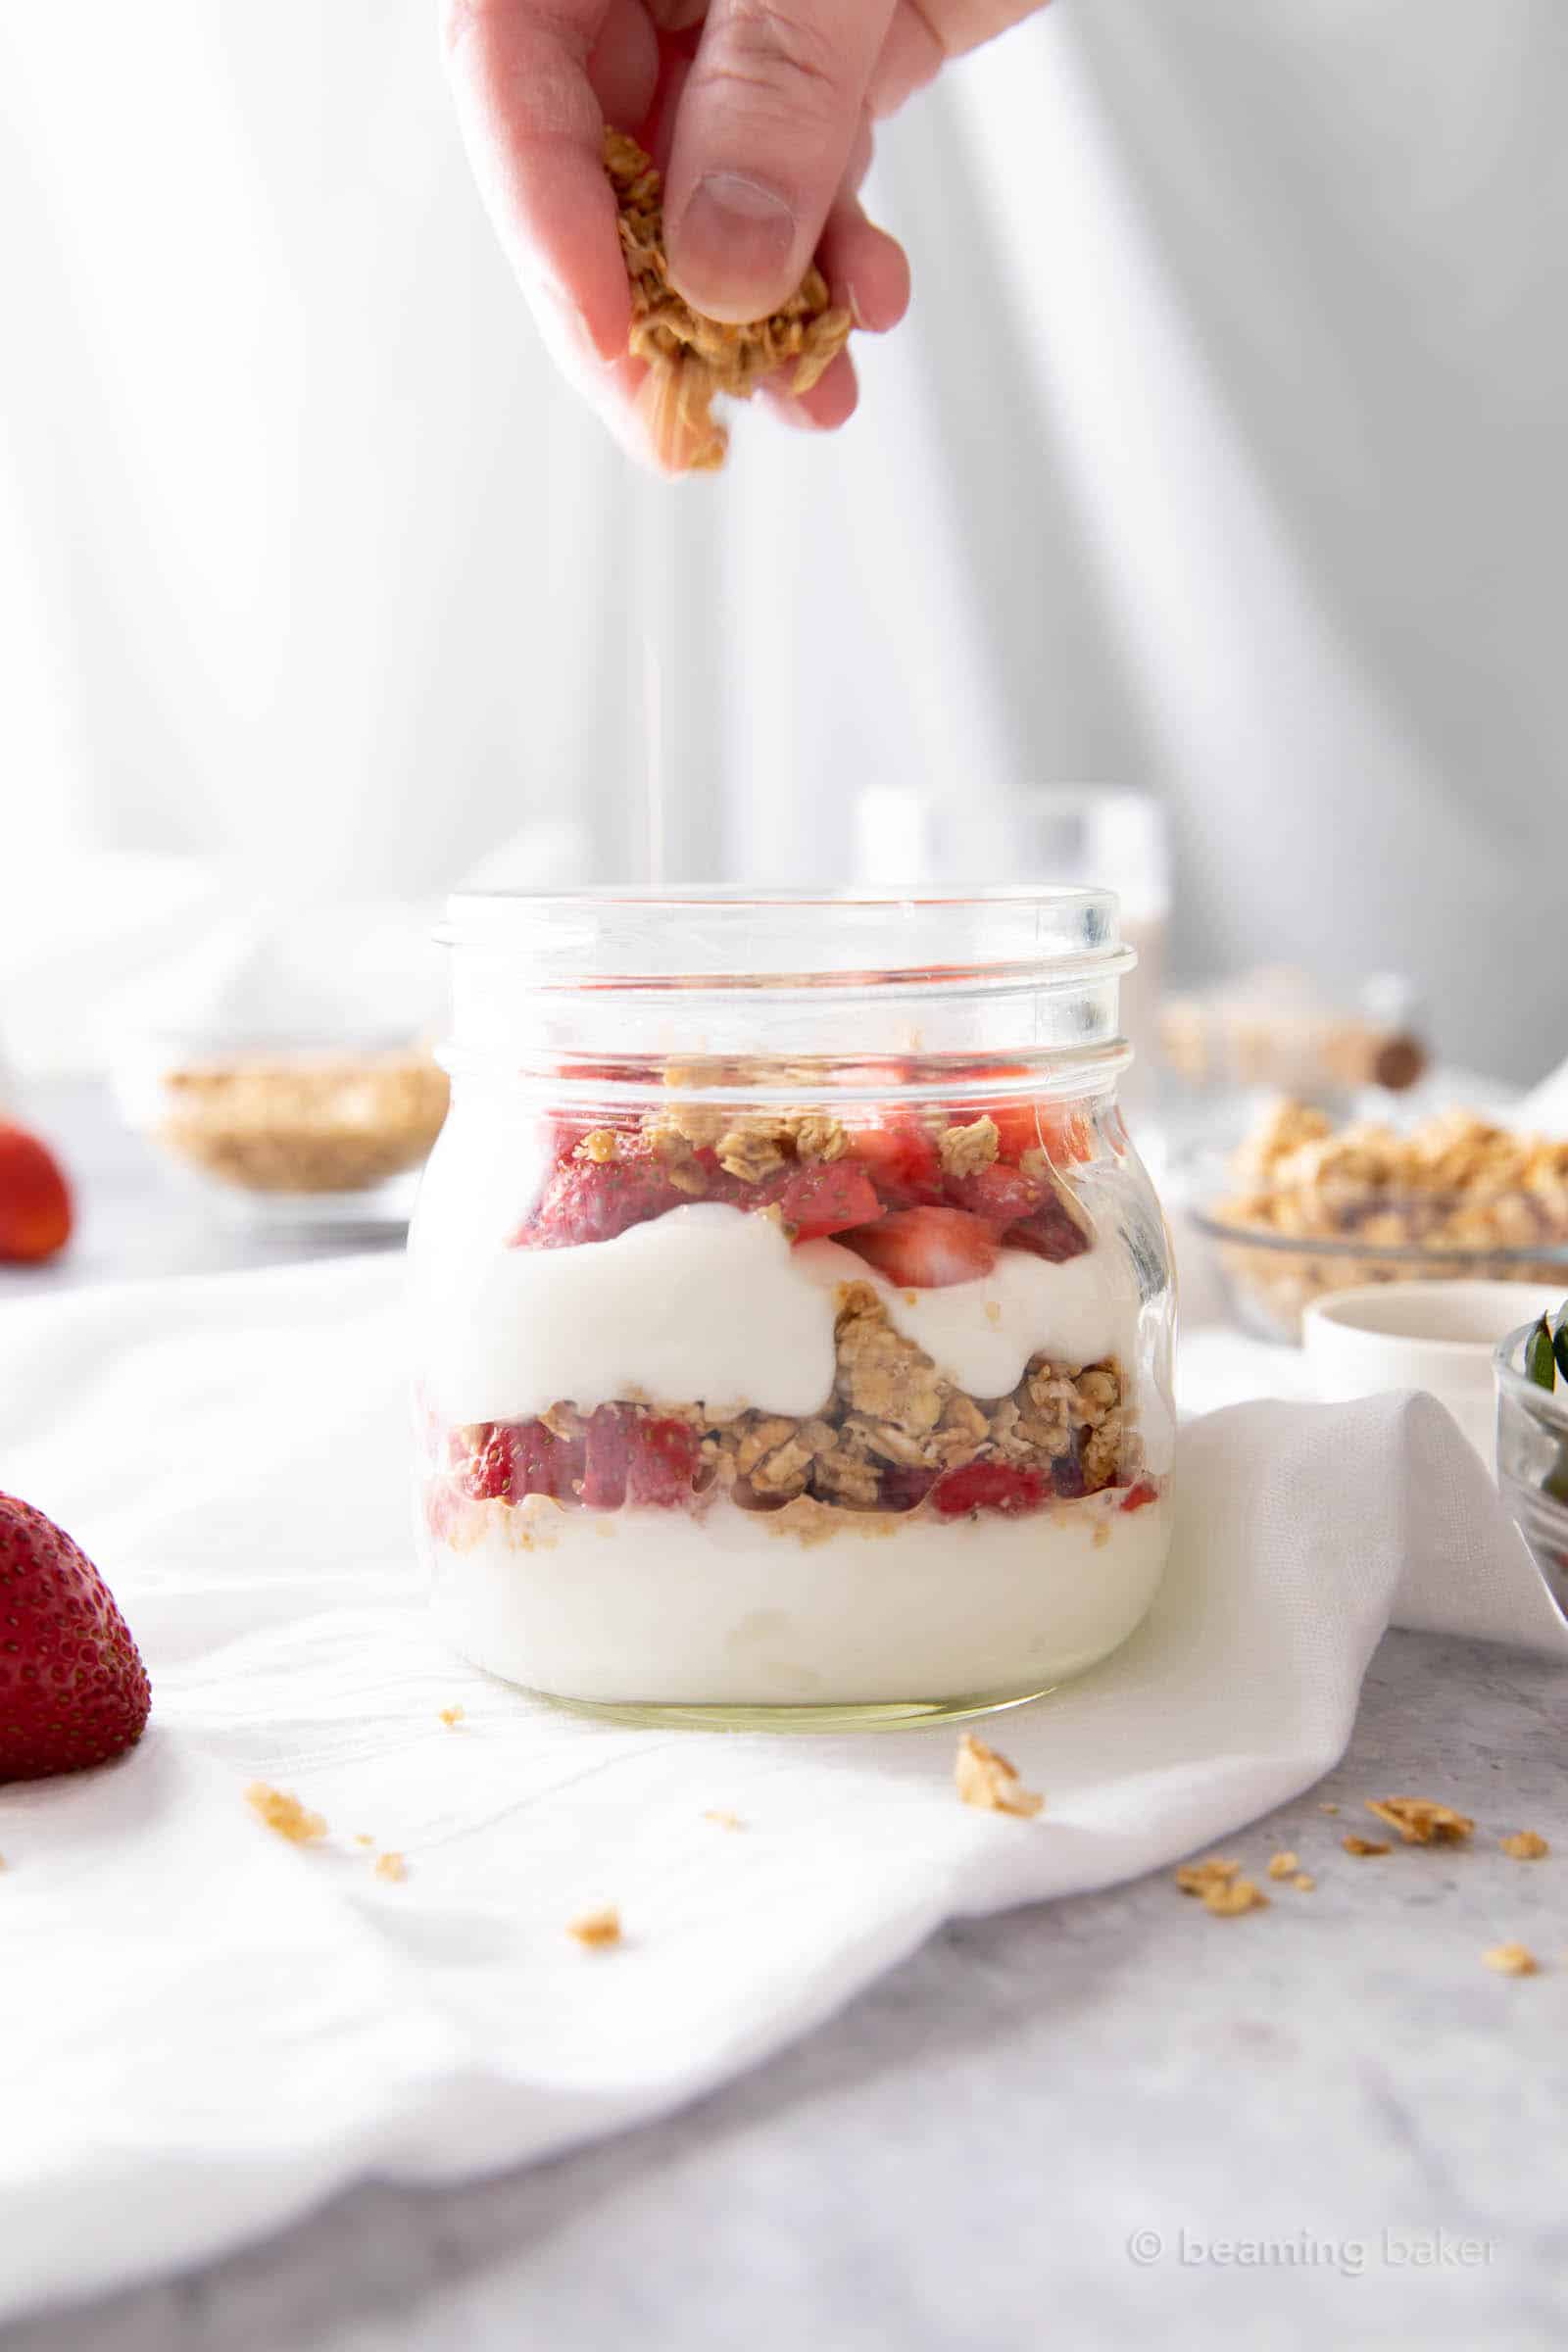 Hand sprinkling granola over strawberries to create another parfait layer